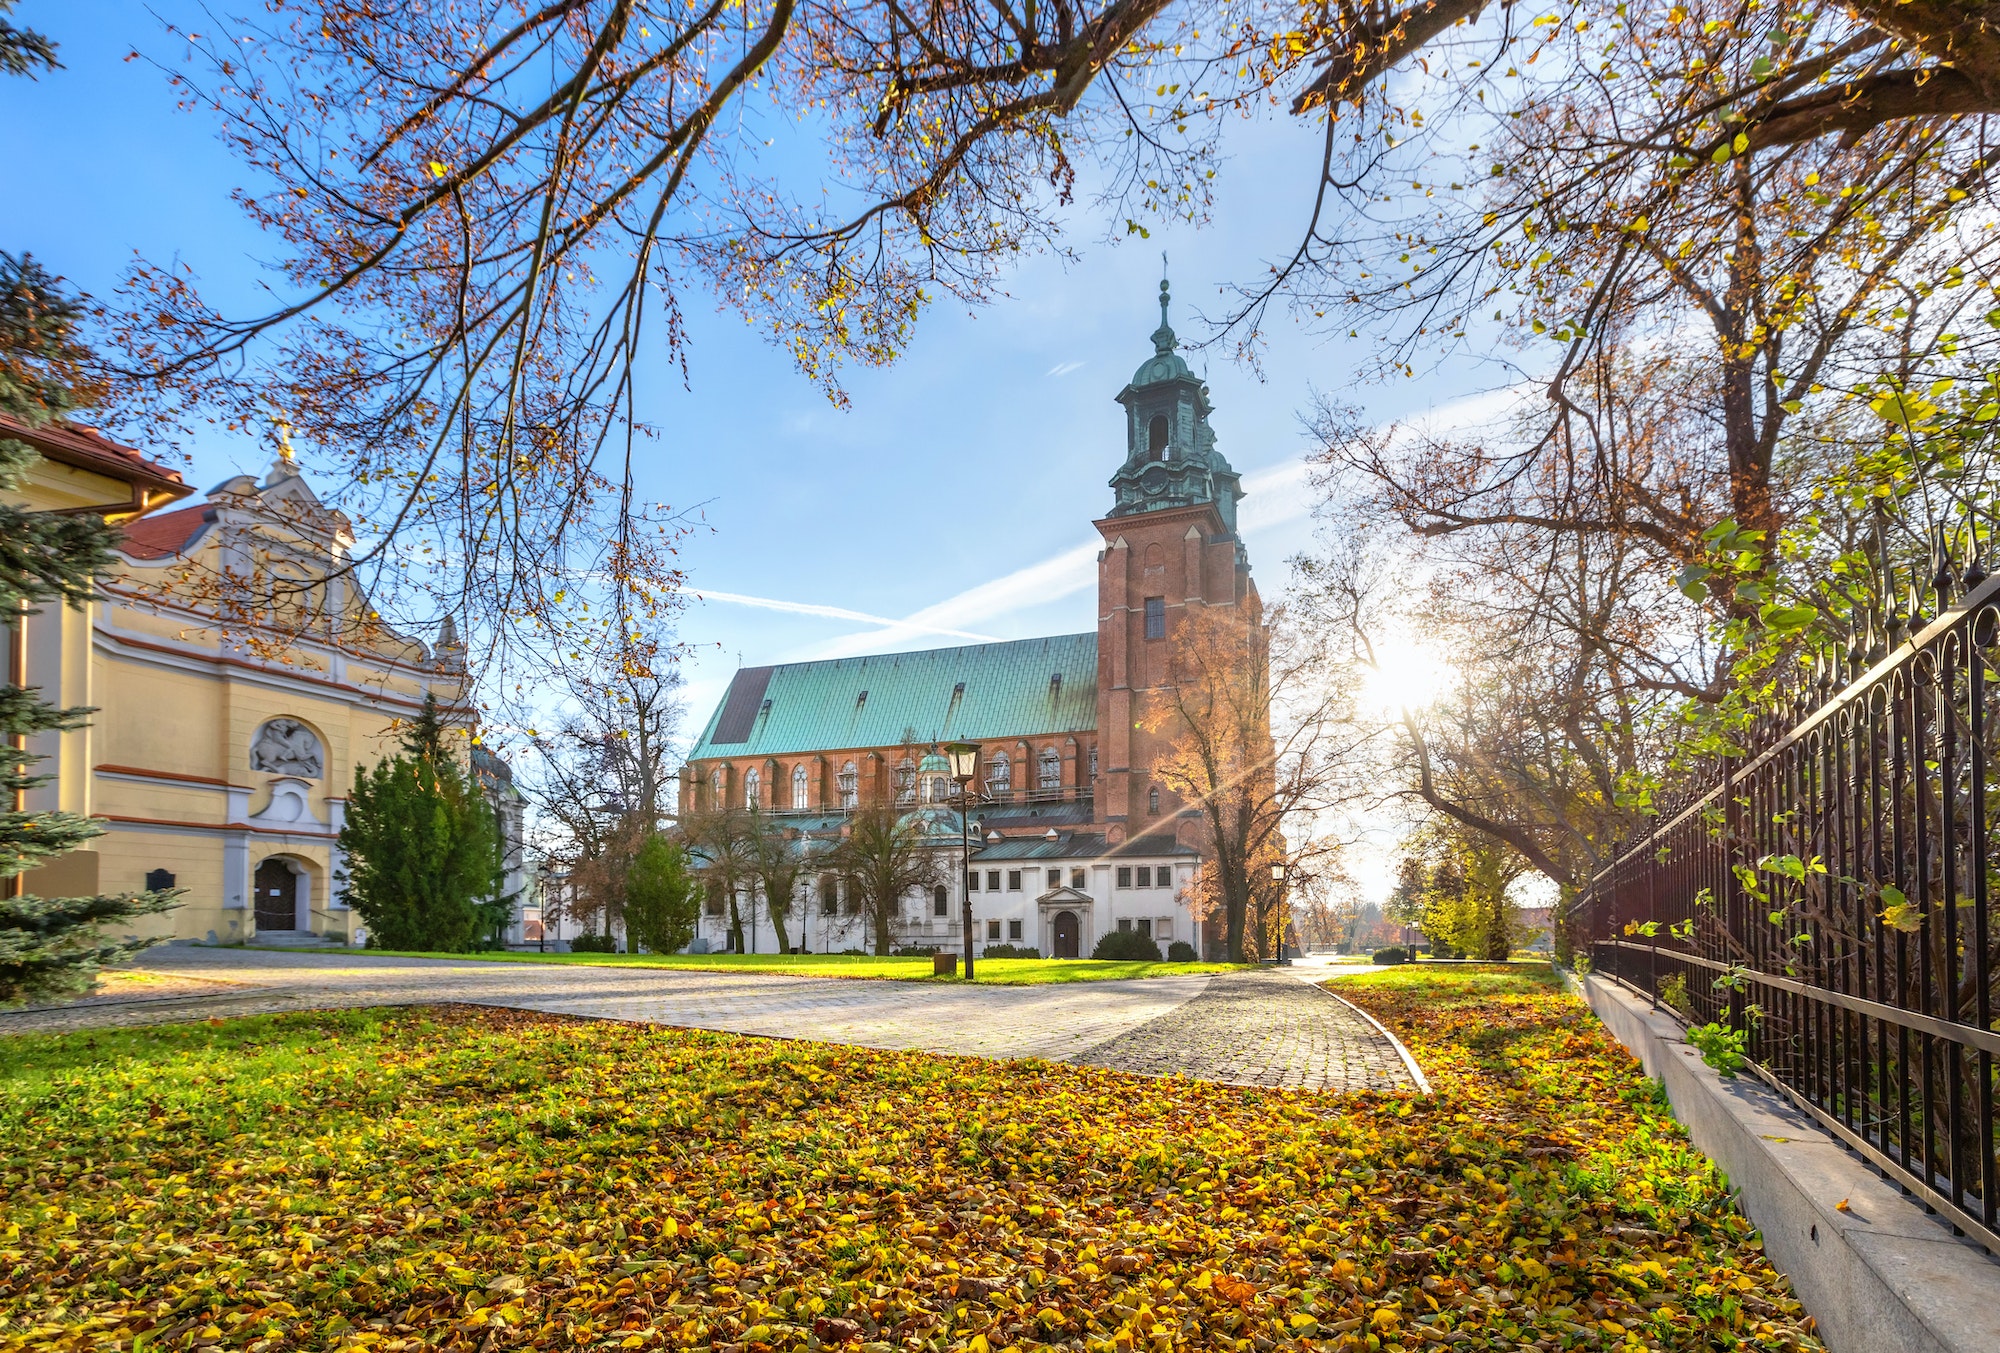 Autumn in Gniezno, Poland. View of Cathedral Basilica